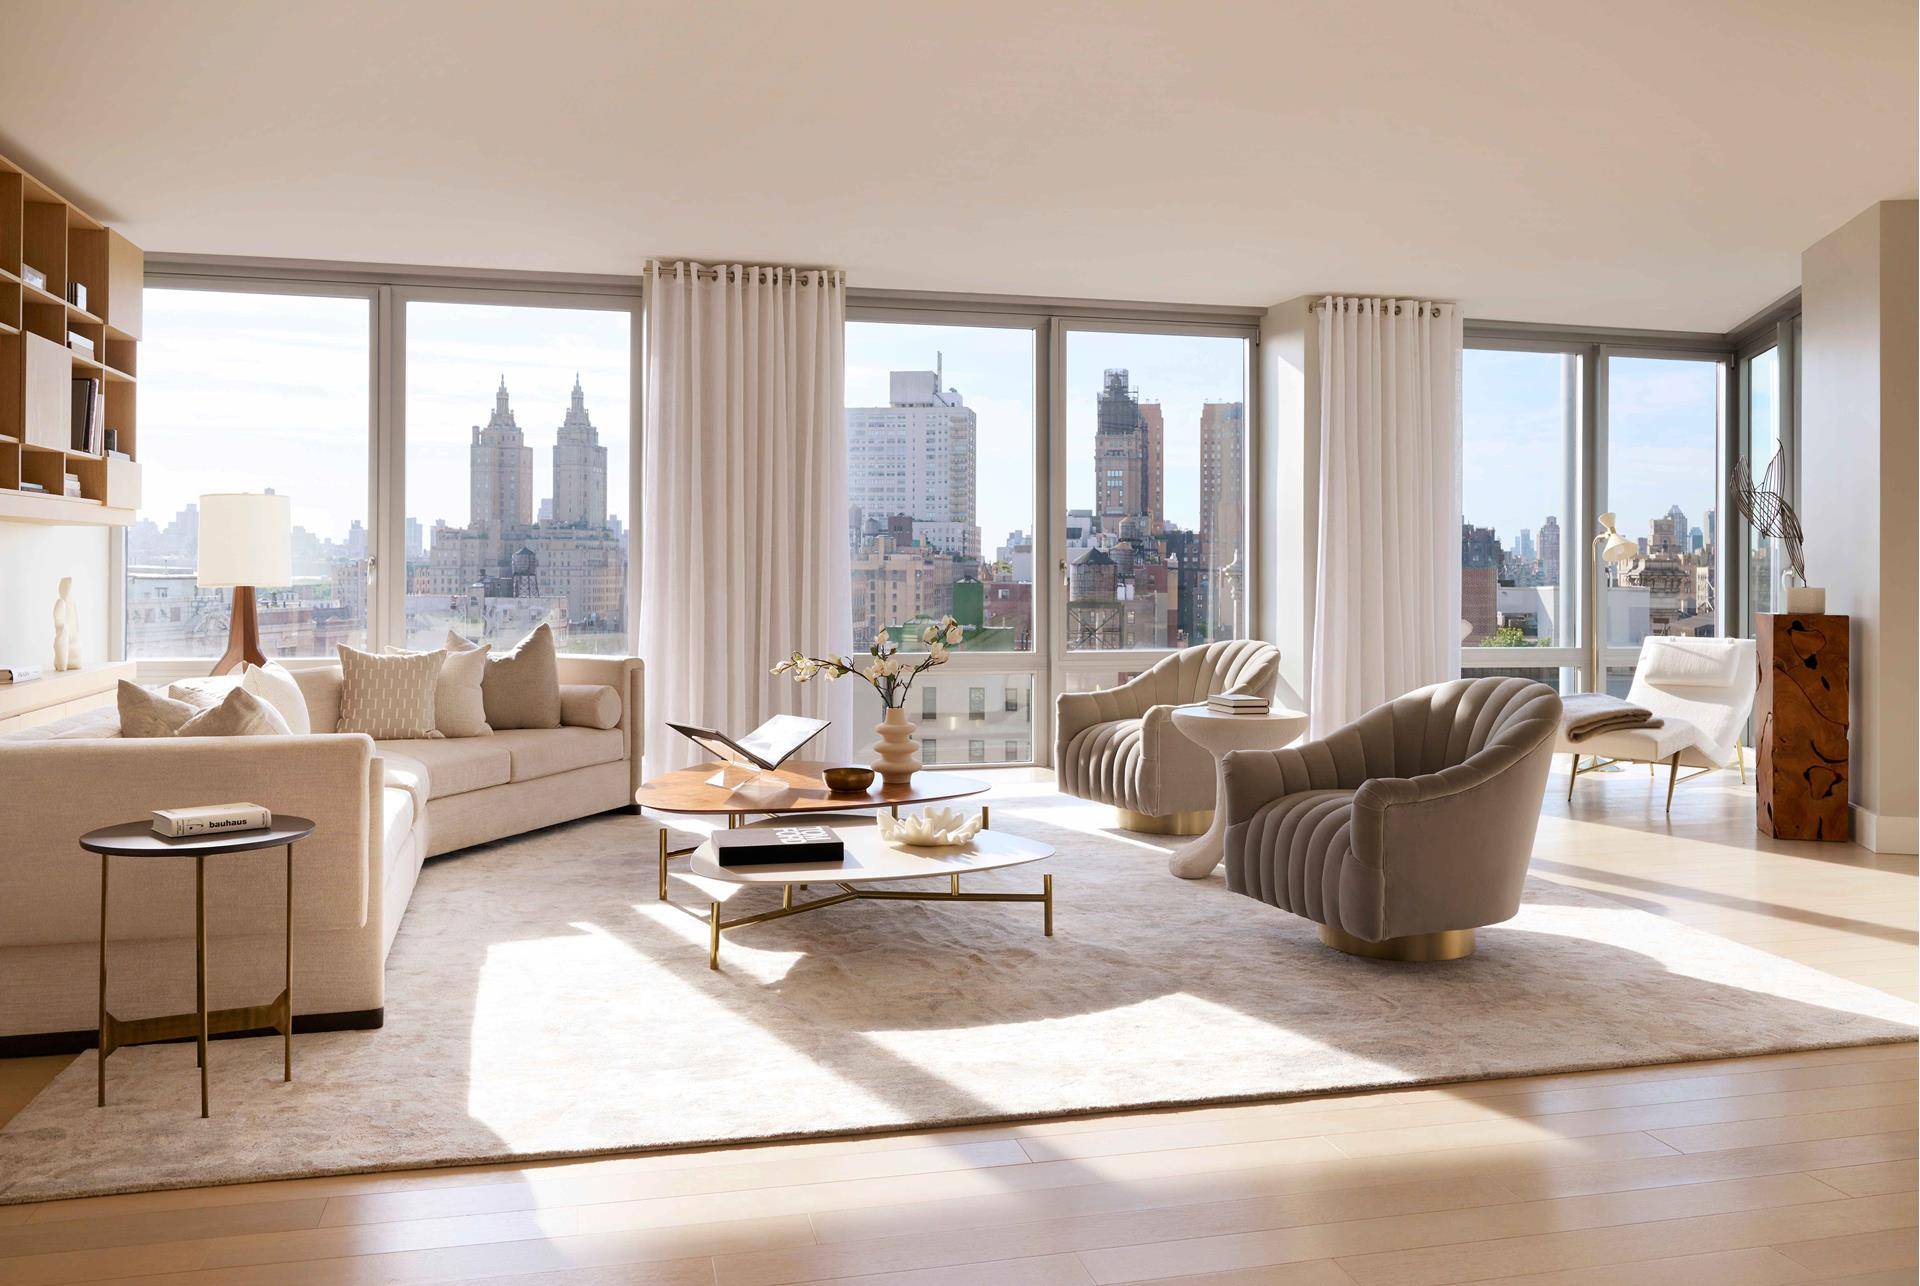 Model Residence. This magnificent, 2, 834 square foot, four bedroom, four and a half bathroom home unveils sweeping Upper West Side views from Central Park to Columbus Circle through south, ...